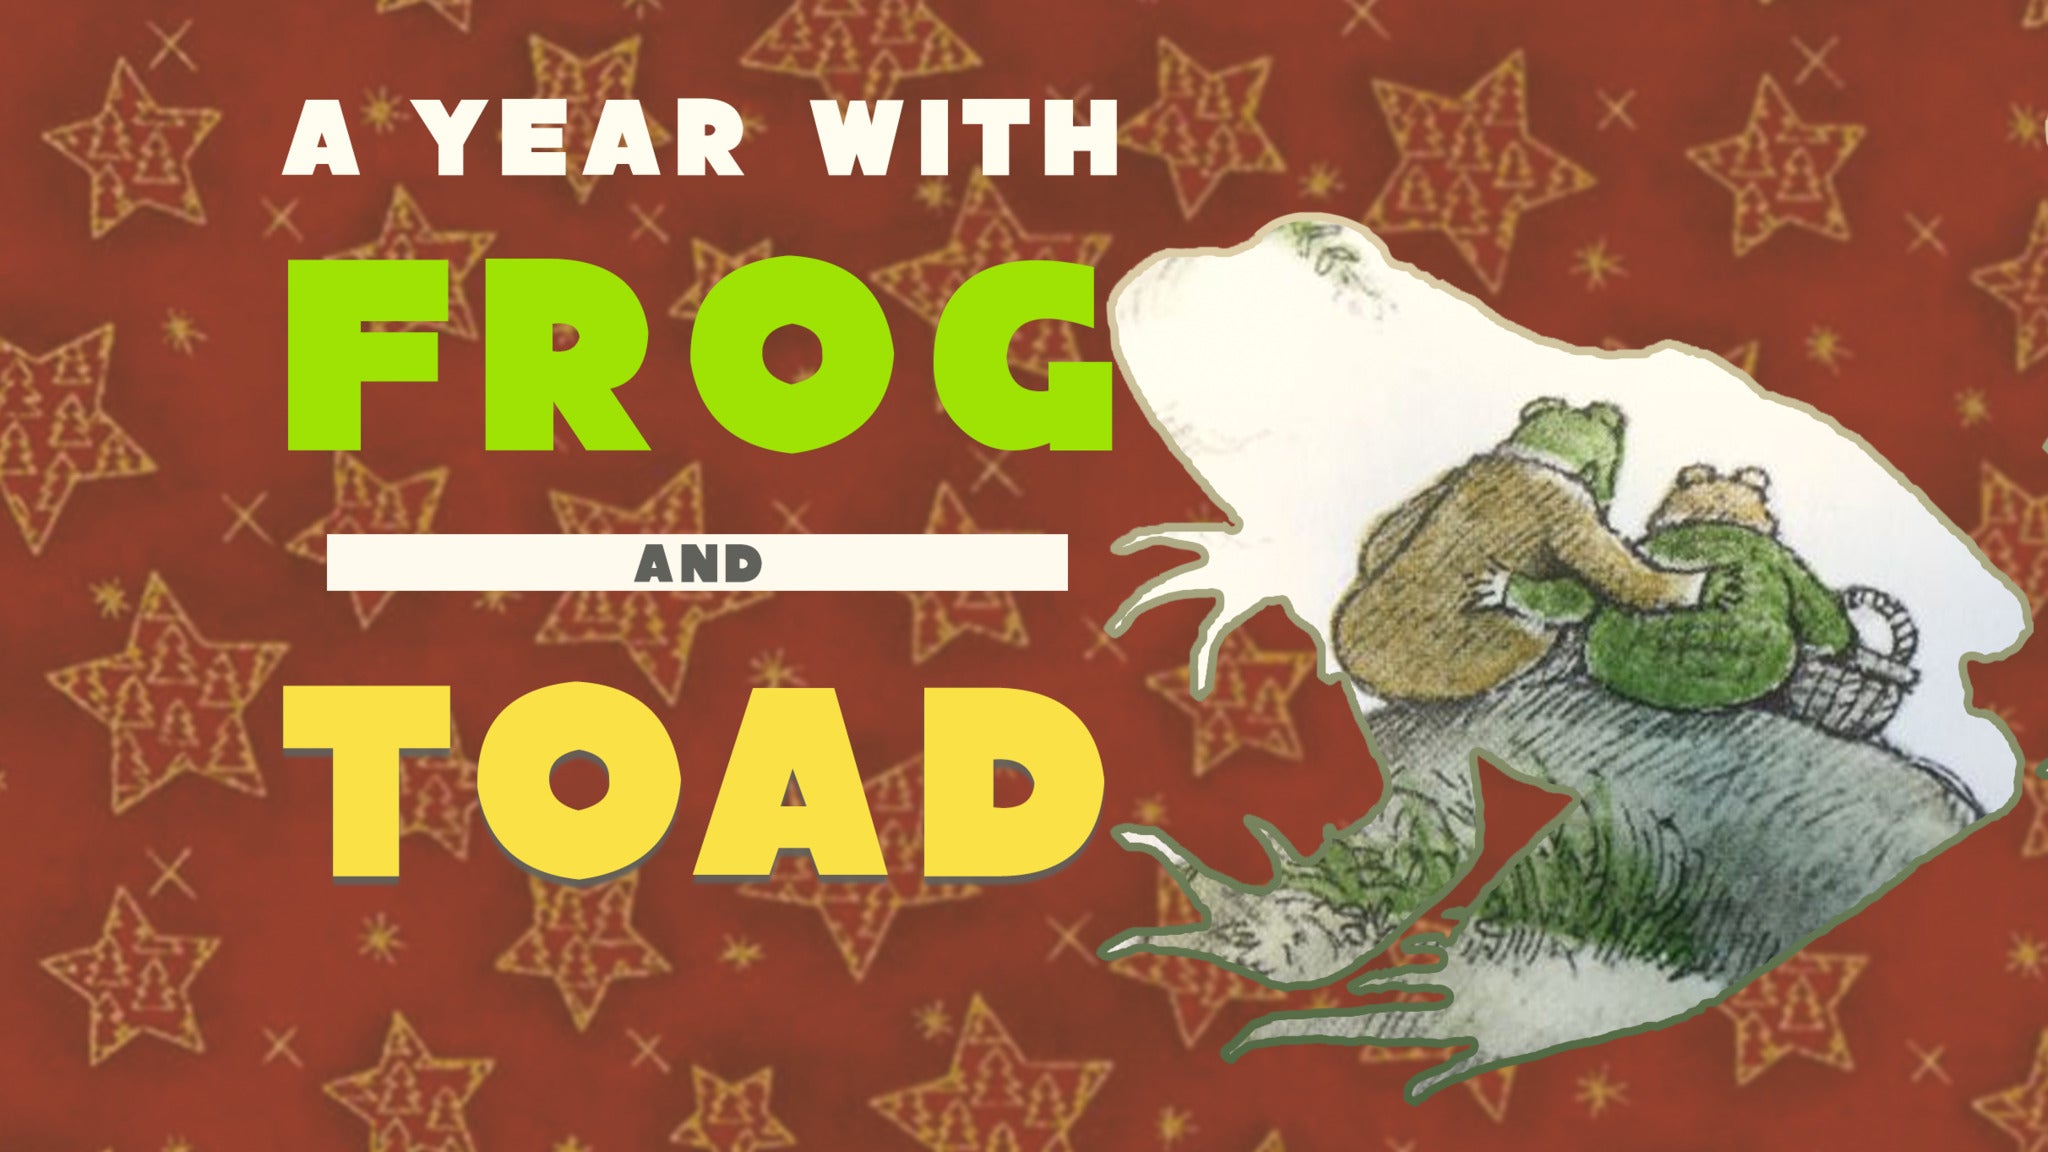 A Year with Frog and Toad at Arvada Center